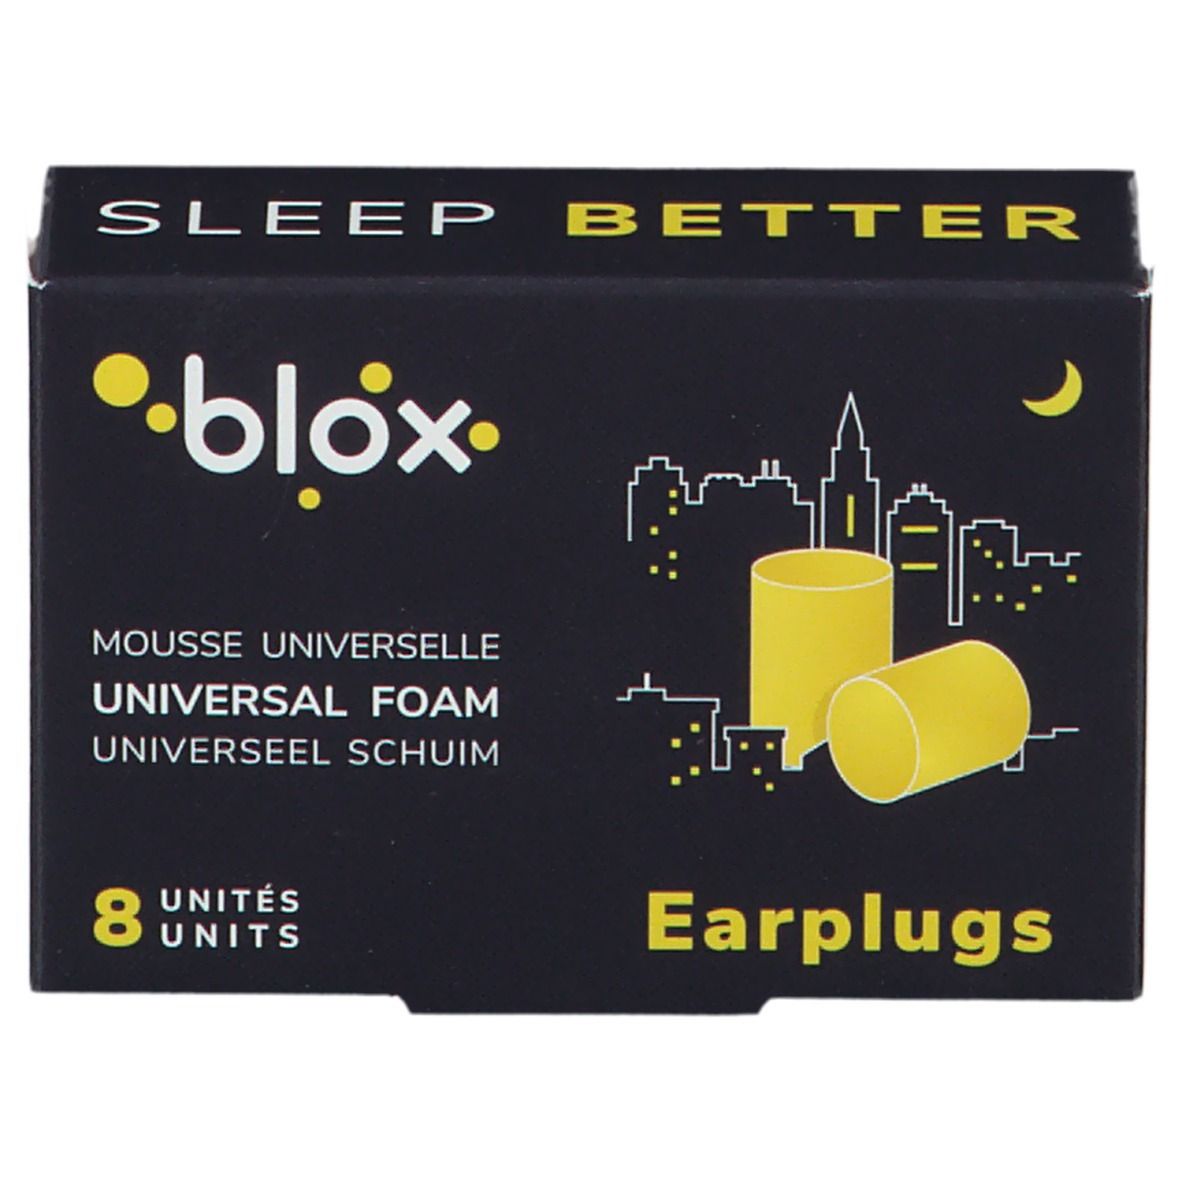 Blox Protections Auditives Dormir (Cylindrique)